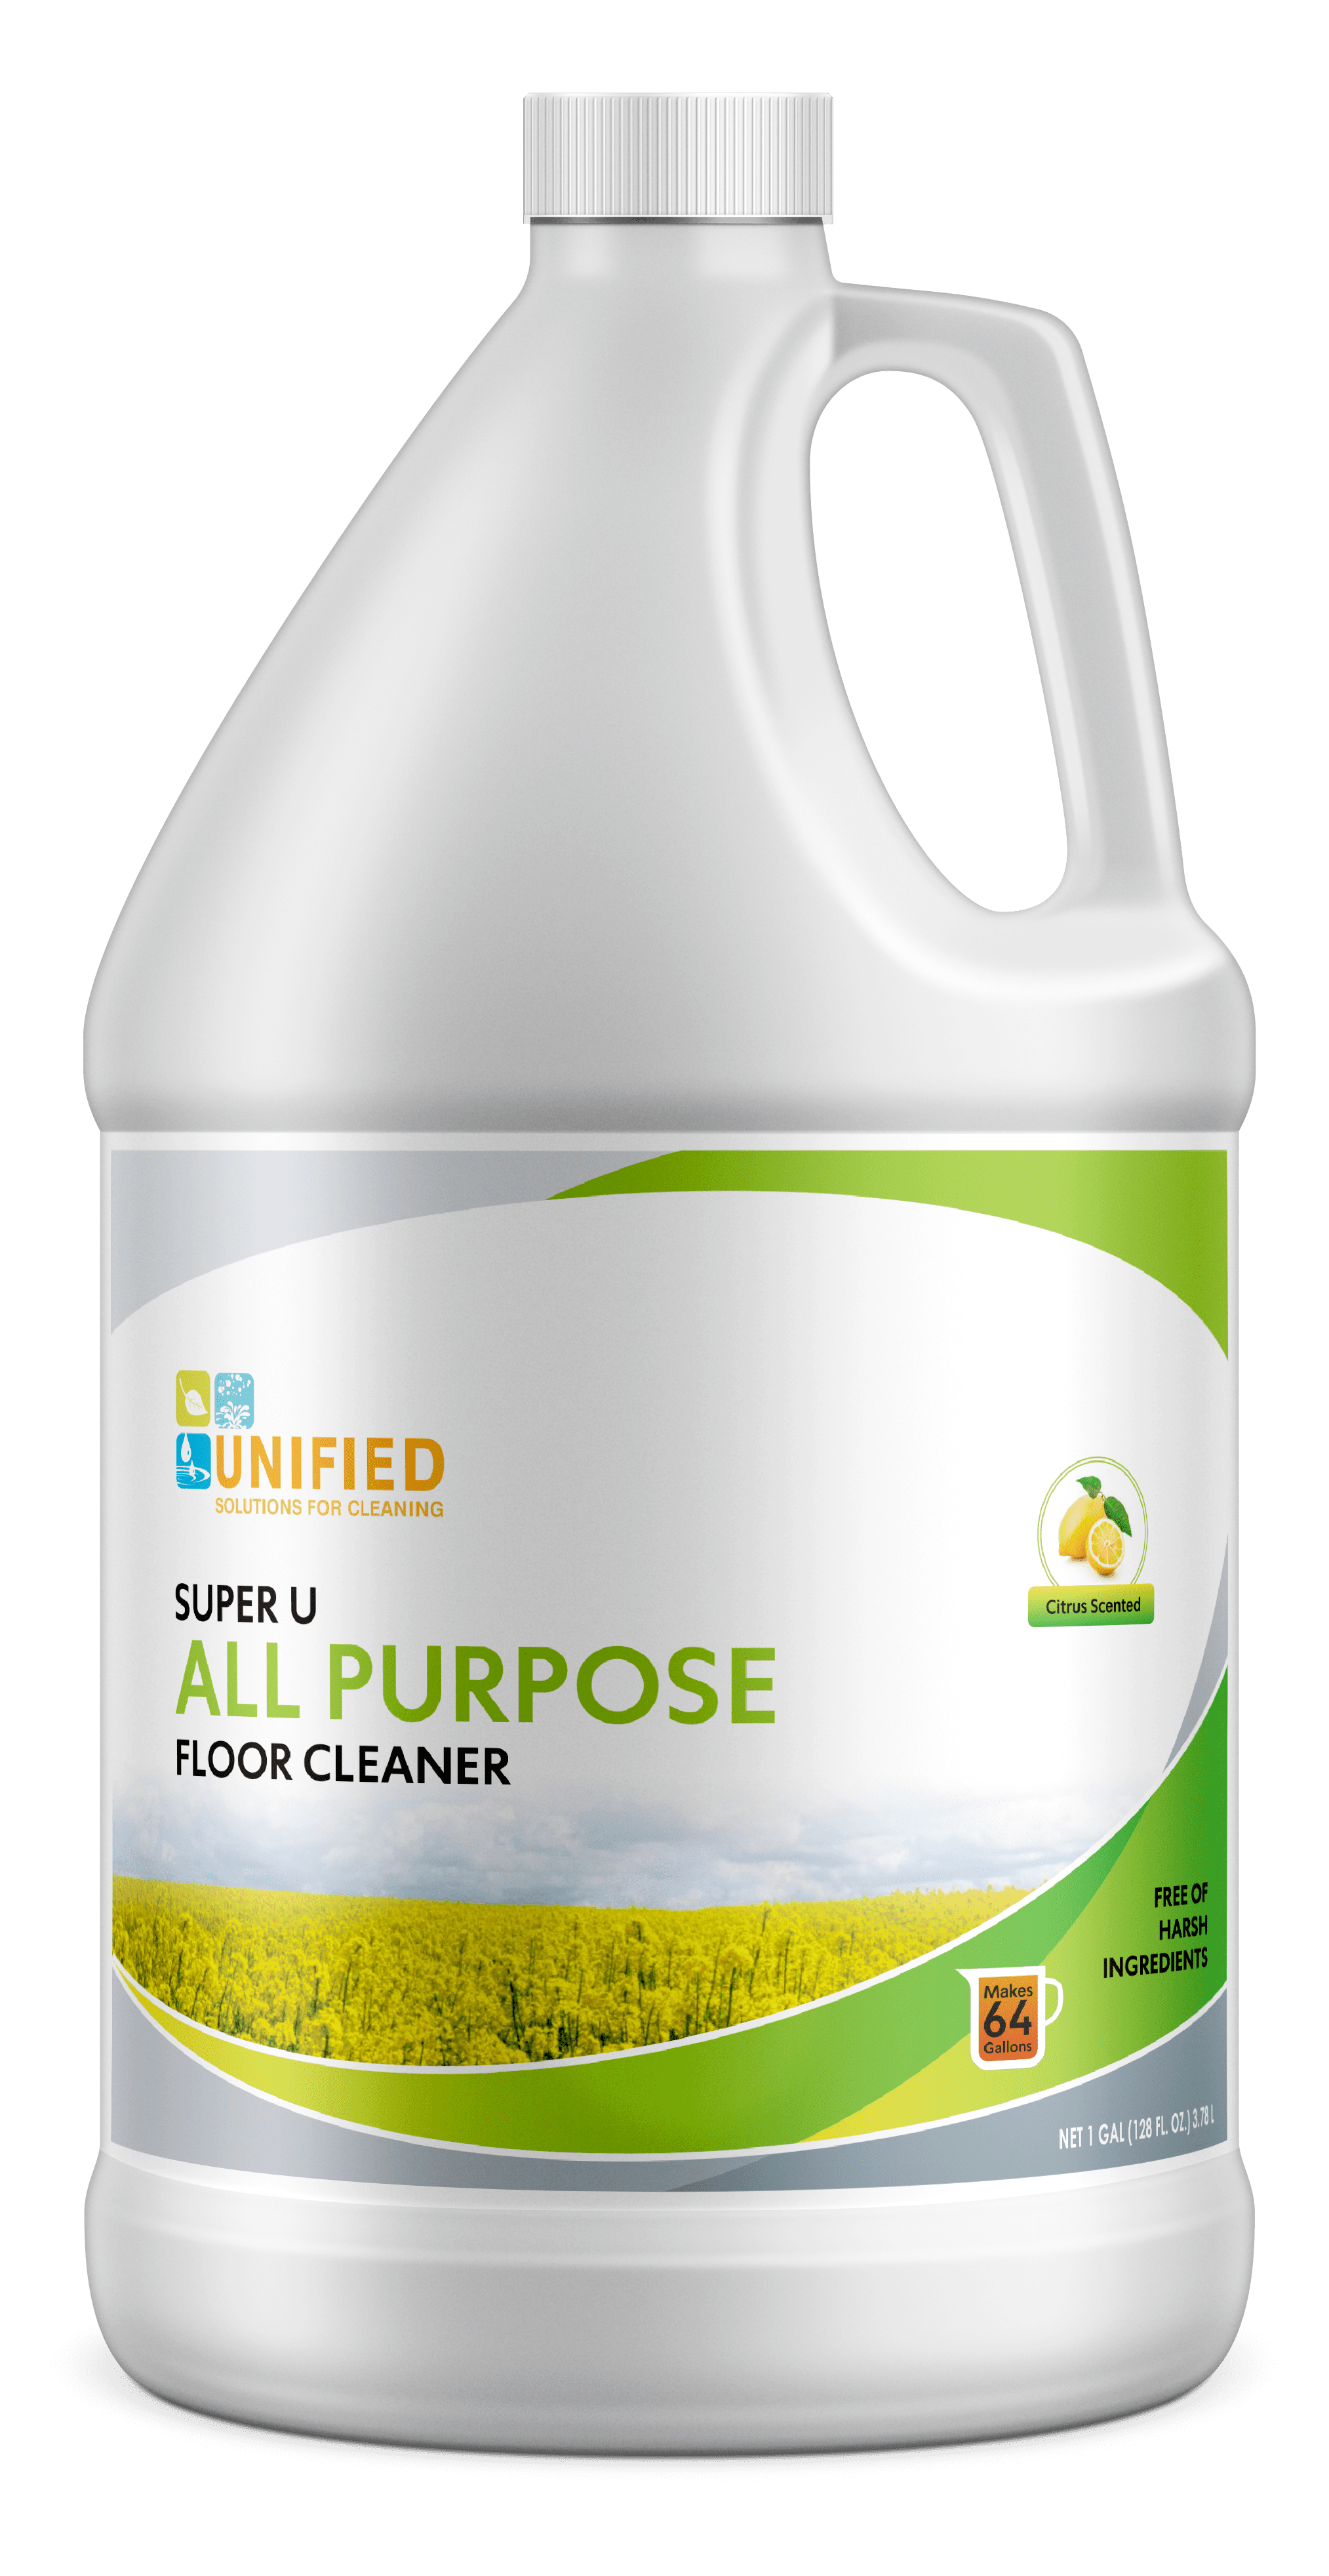 Unified_All_Purpose_Floor_Cleaner